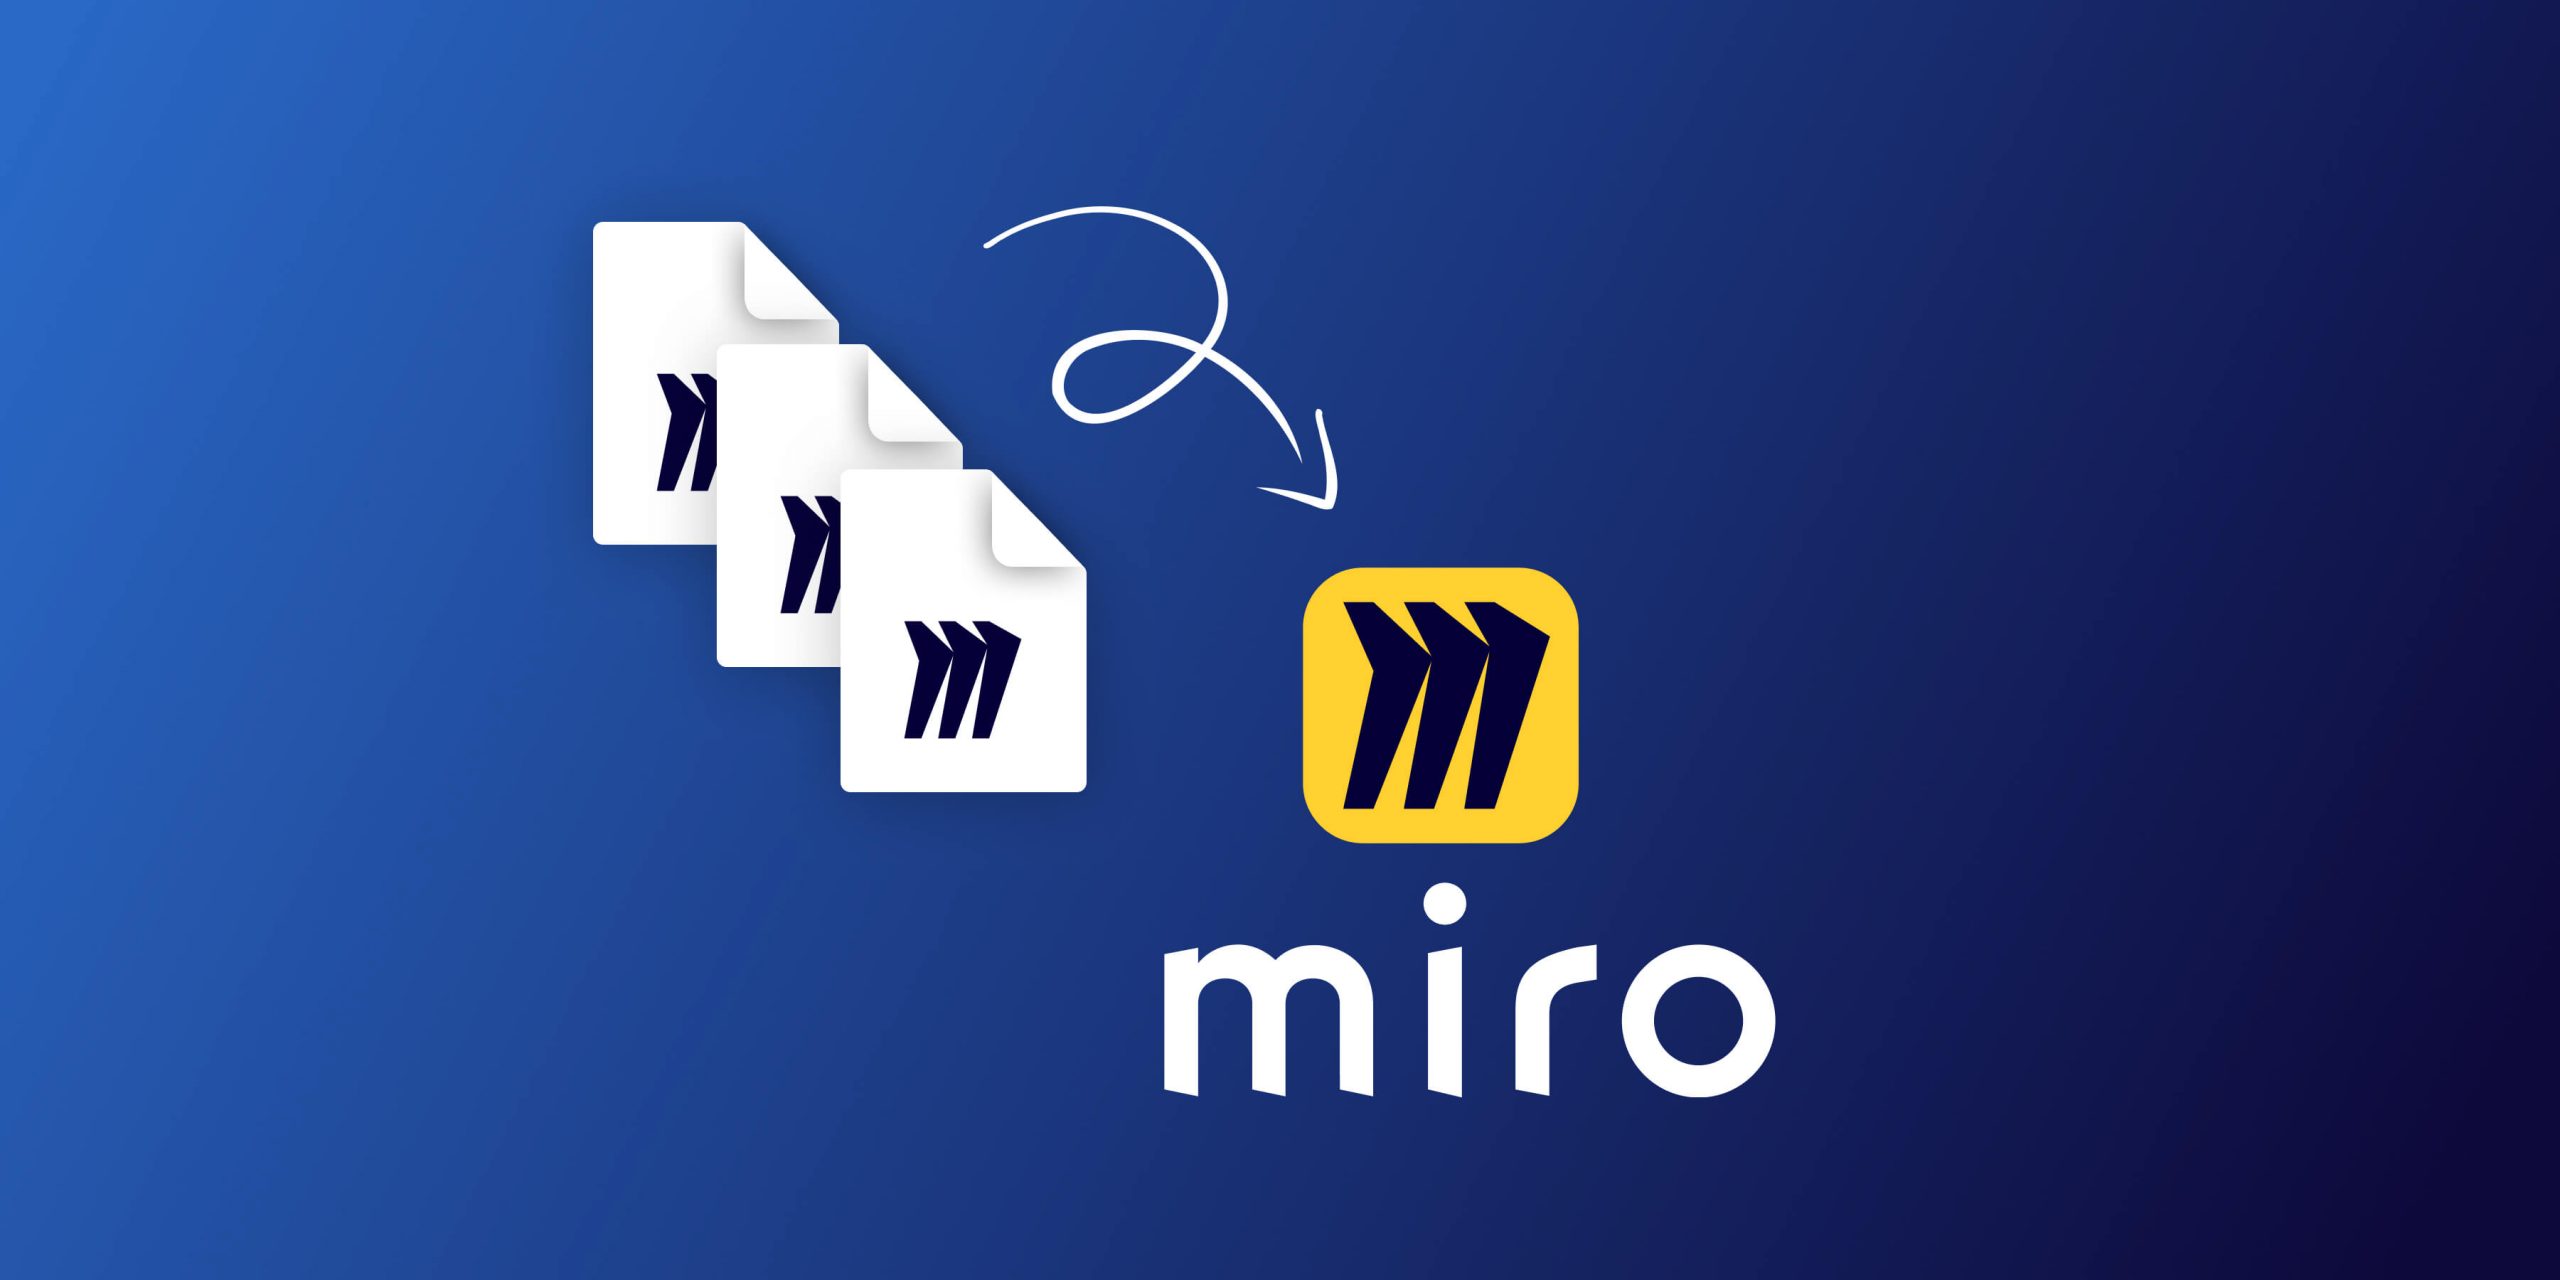 How to import RTB files in Miro – A quick step-by-step guide